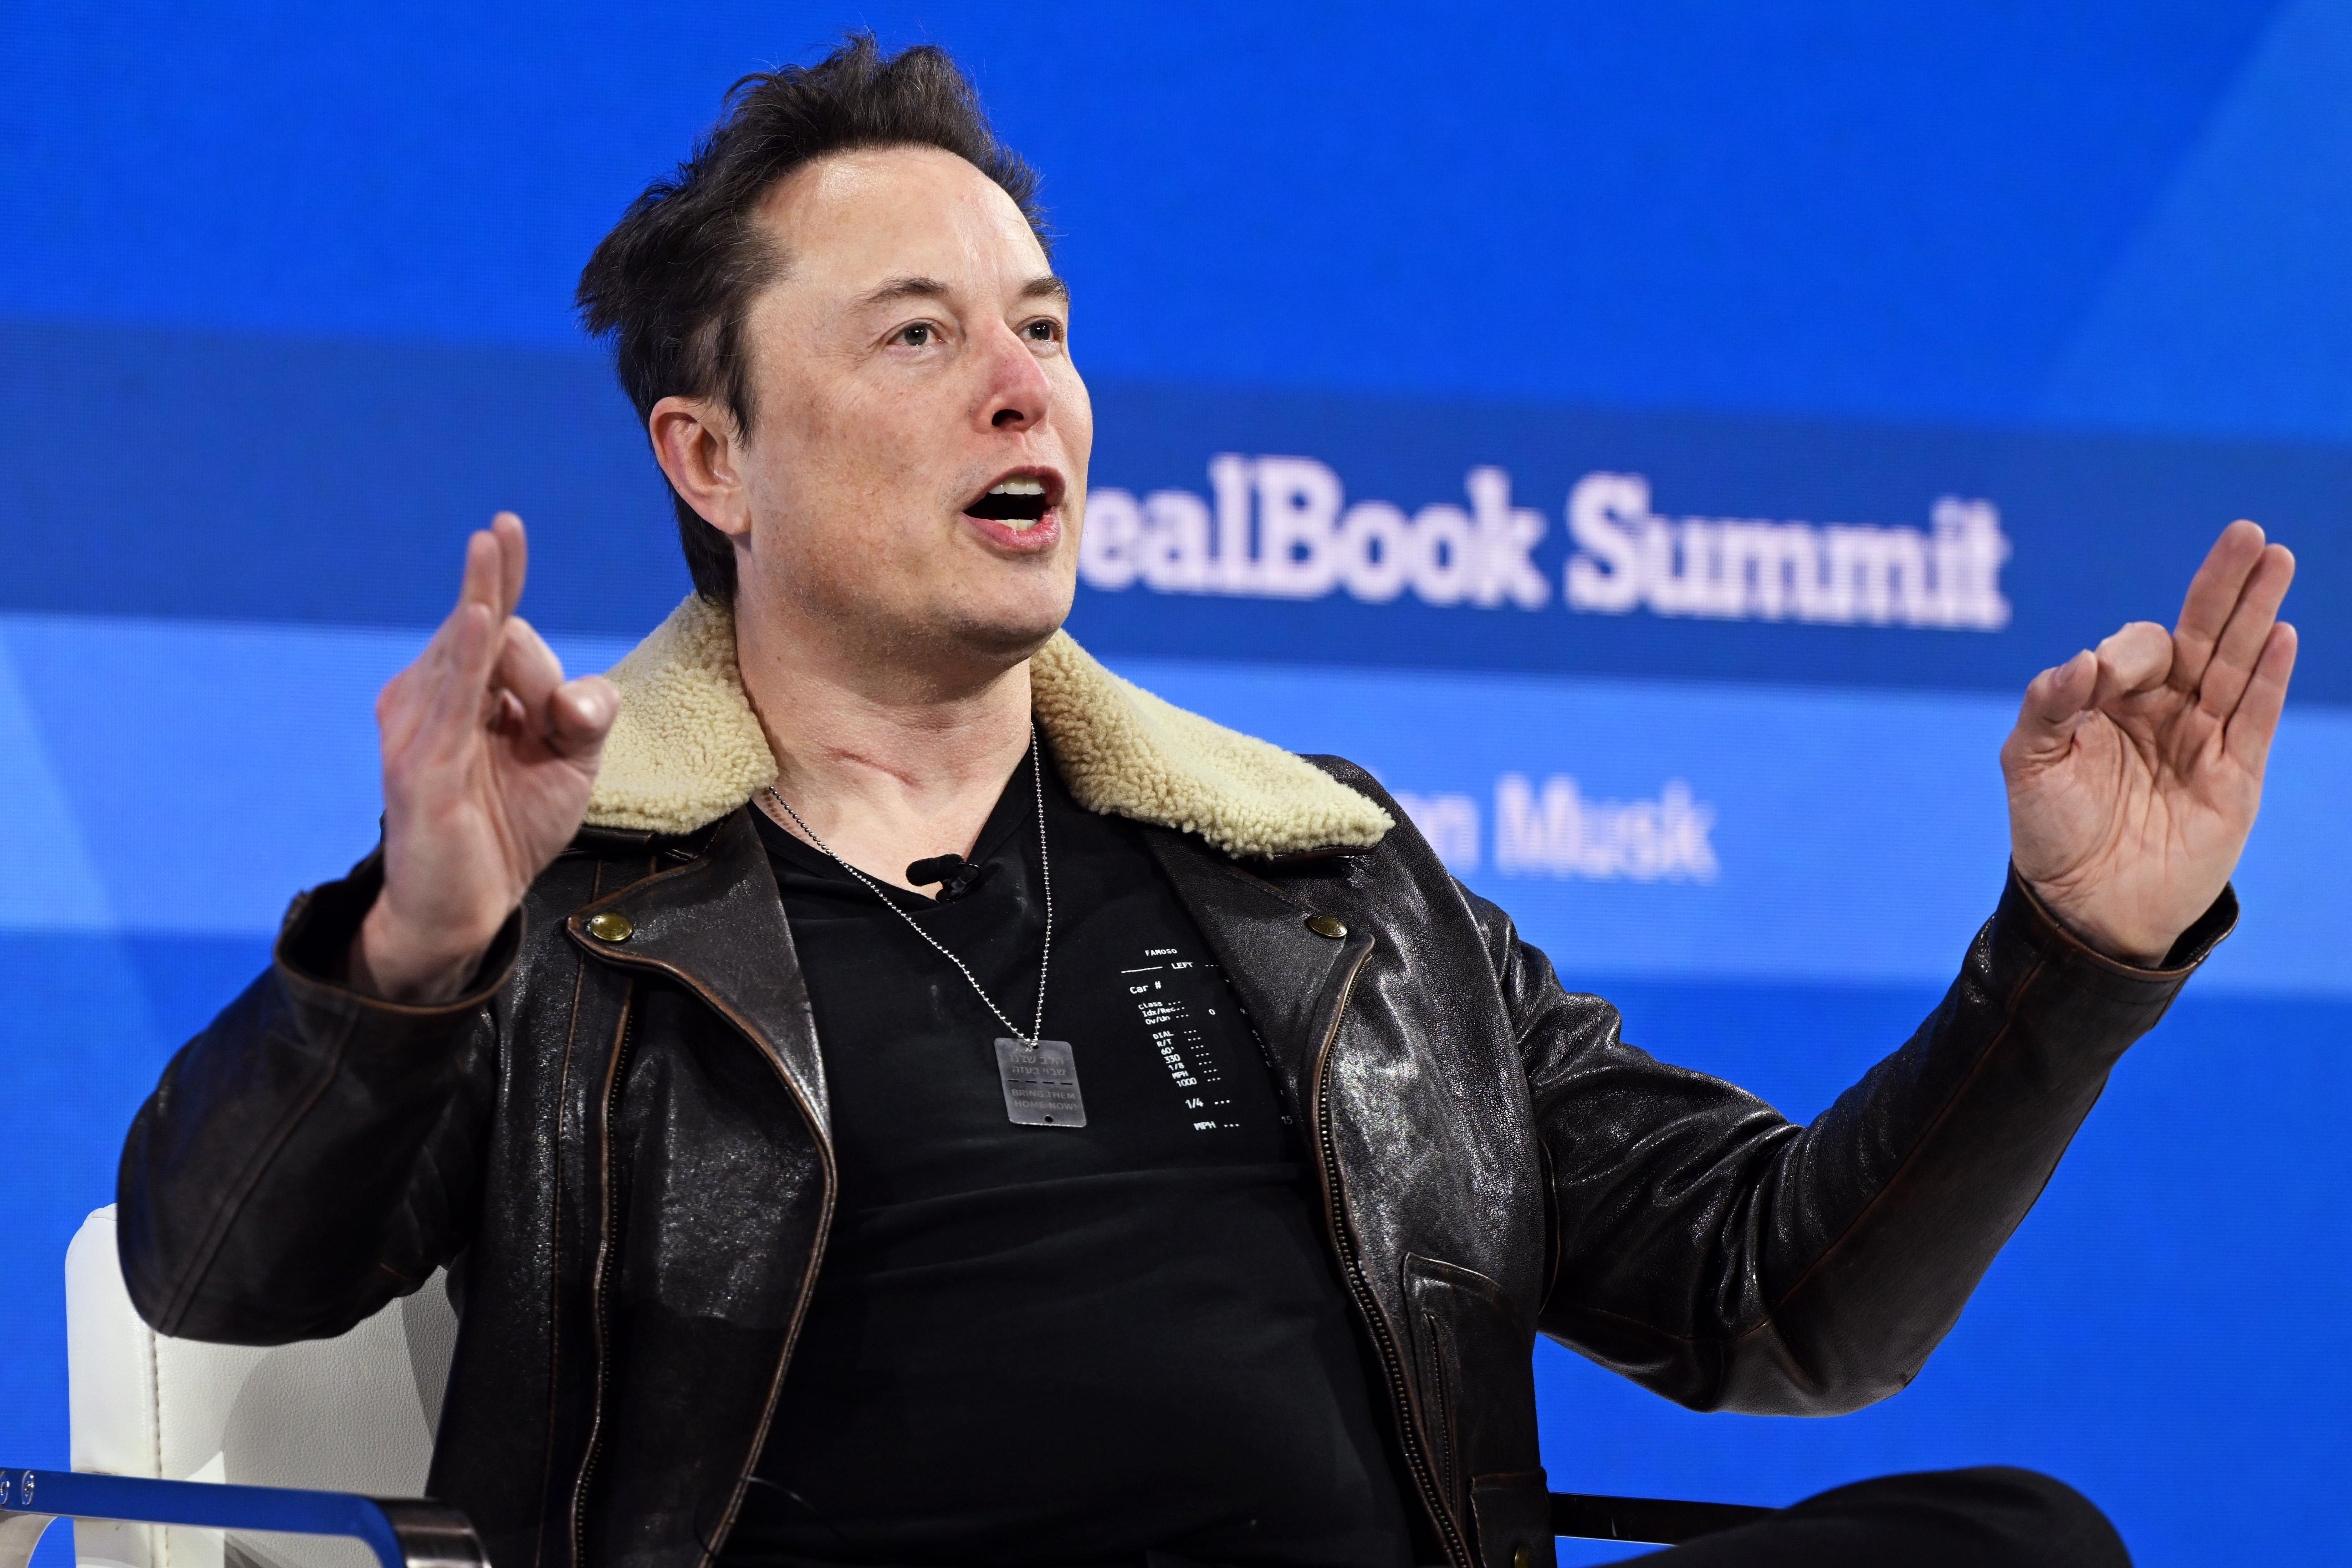 Elon Musk wears a black jacket and speaks animatedly onstage, holding up both hands in an OK symbol.